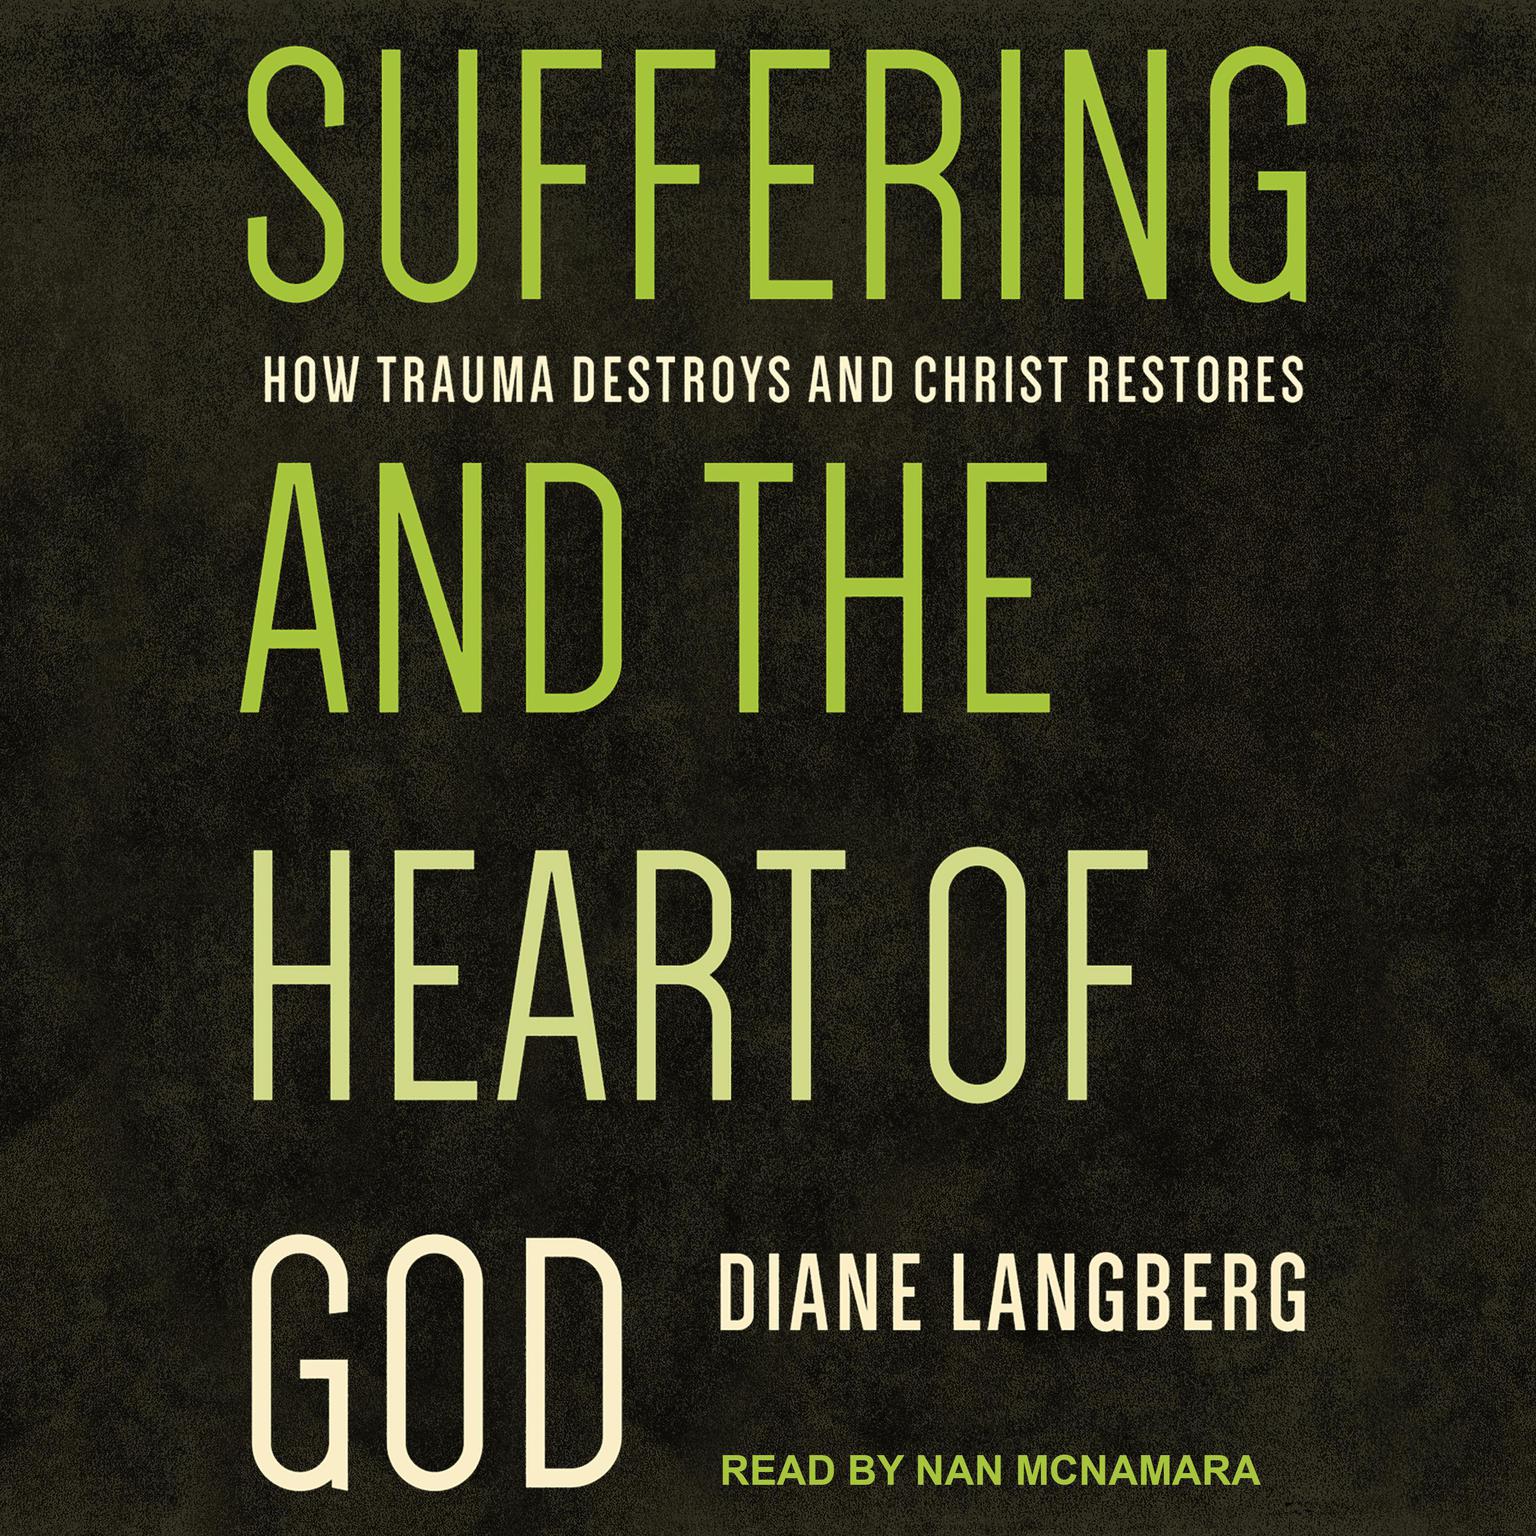 Suffering and the Heart of God: How Trauma Destroys and Christ Restores Audiobook, by Diane Langberg